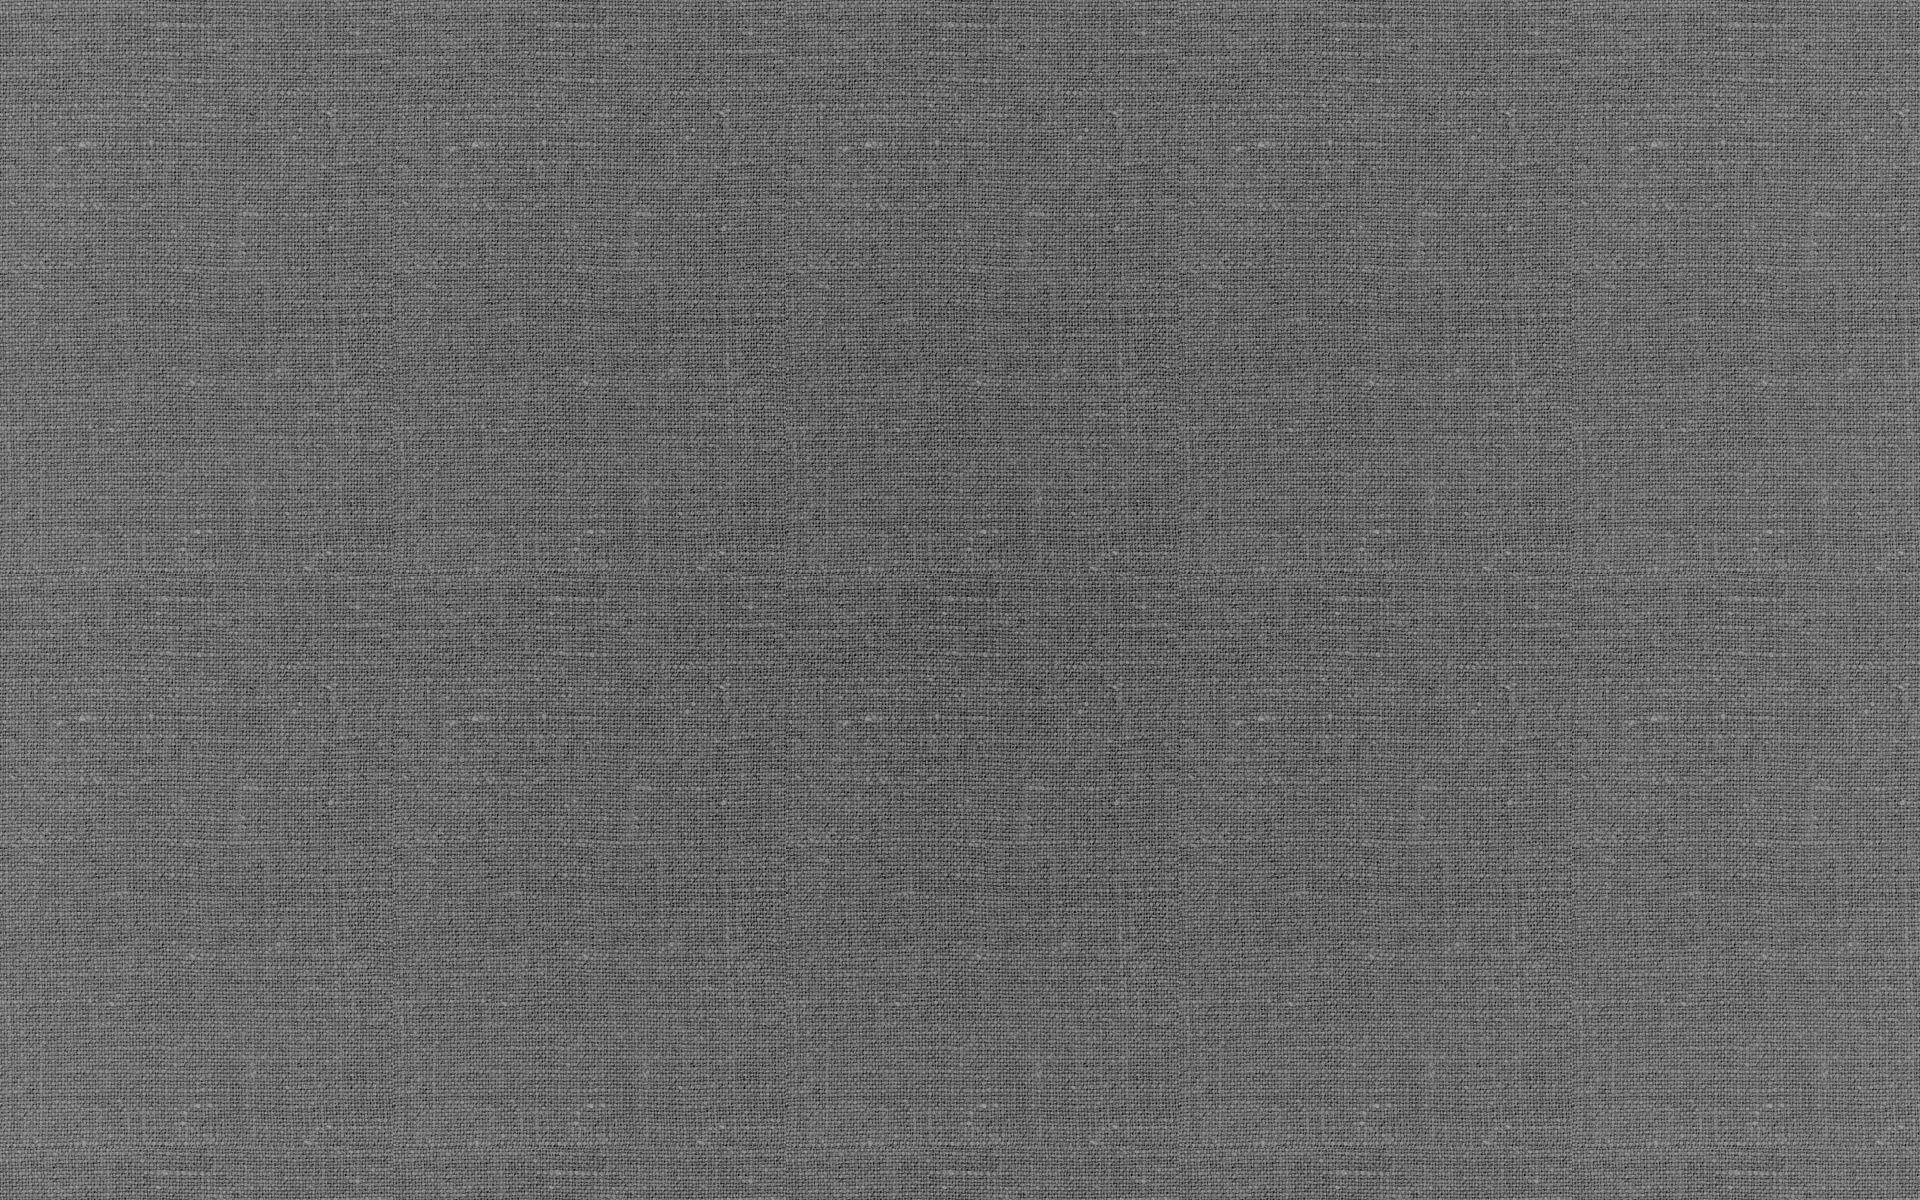 grey, textures, grid, texture, lines, surface